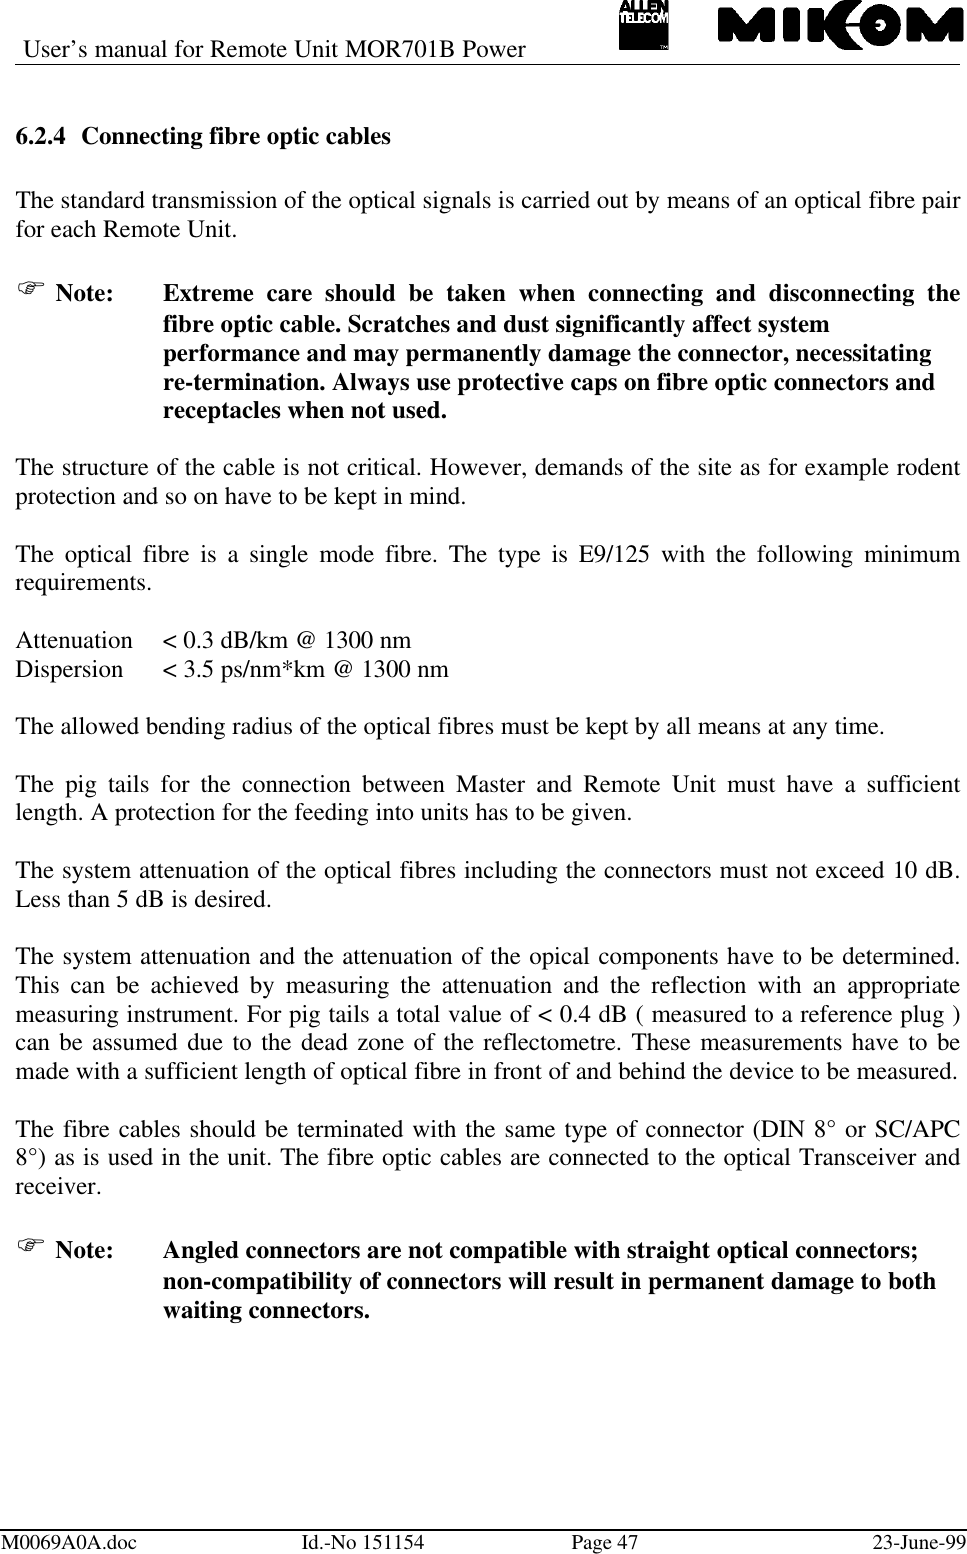 User’s manual for Remote Unit MOR701B PowerM0069A0A.doc Id.-No 151154 Page 47 23-June-996.2.4 Connecting fibre optic cablesThe standard transmission of the optical signals is carried out by means of an optical fibre pairfor each Remote Unit.F Note: Extreme care should be taken when connecting and disconnecting thefibre optic cable. Scratches and dust significantly affect system performance and may permanently damage the connector, necessitating re-termination. Always use protective caps on fibre optic connectors and receptacles when not used.The structure of the cable is not critical. However, demands of the site as for example rodentprotection and so on have to be kept in mind.The optical fibre is a single mode fibre. The type is E9/125 with the following minimumrequirements.Attenuation &lt; 0.3 dB/km @ 1300 nmDispersion &lt; 3.5 ps/nm*km @ 1300 nmThe allowed bending radius of the optical fibres must be kept by all means at any time.The pig tails for the connection between Master and Remote Unit must have a sufficientlength. A protection for the feeding into units has to be given.The system attenuation of the optical fibres including the connectors must not exceed 10 dB.Less than 5 dB is desired.The system attenuation and the attenuation of the opical components have to be determined.This can be achieved by measuring the attenuation and the reflection with an appropriatemeasuring instrument. For pig tails a total value of &lt; 0.4 dB ( measured to a reference plug )can be assumed due to the dead zone of the reflectometre. These measurements have to bemade with a sufficient length of optical fibre in front of and behind the device to be measured.The fibre cables should be terminated with the same type of connector (DIN 8° or SC/APC8°) as is used in the unit. The fibre optic cables are connected to the optical Transceiver andreceiver.F Note:   Angled connectors are not compatible with straight optical connectors;non-compatibility of connectors will result in permanent damage to bothwaiting connectors.